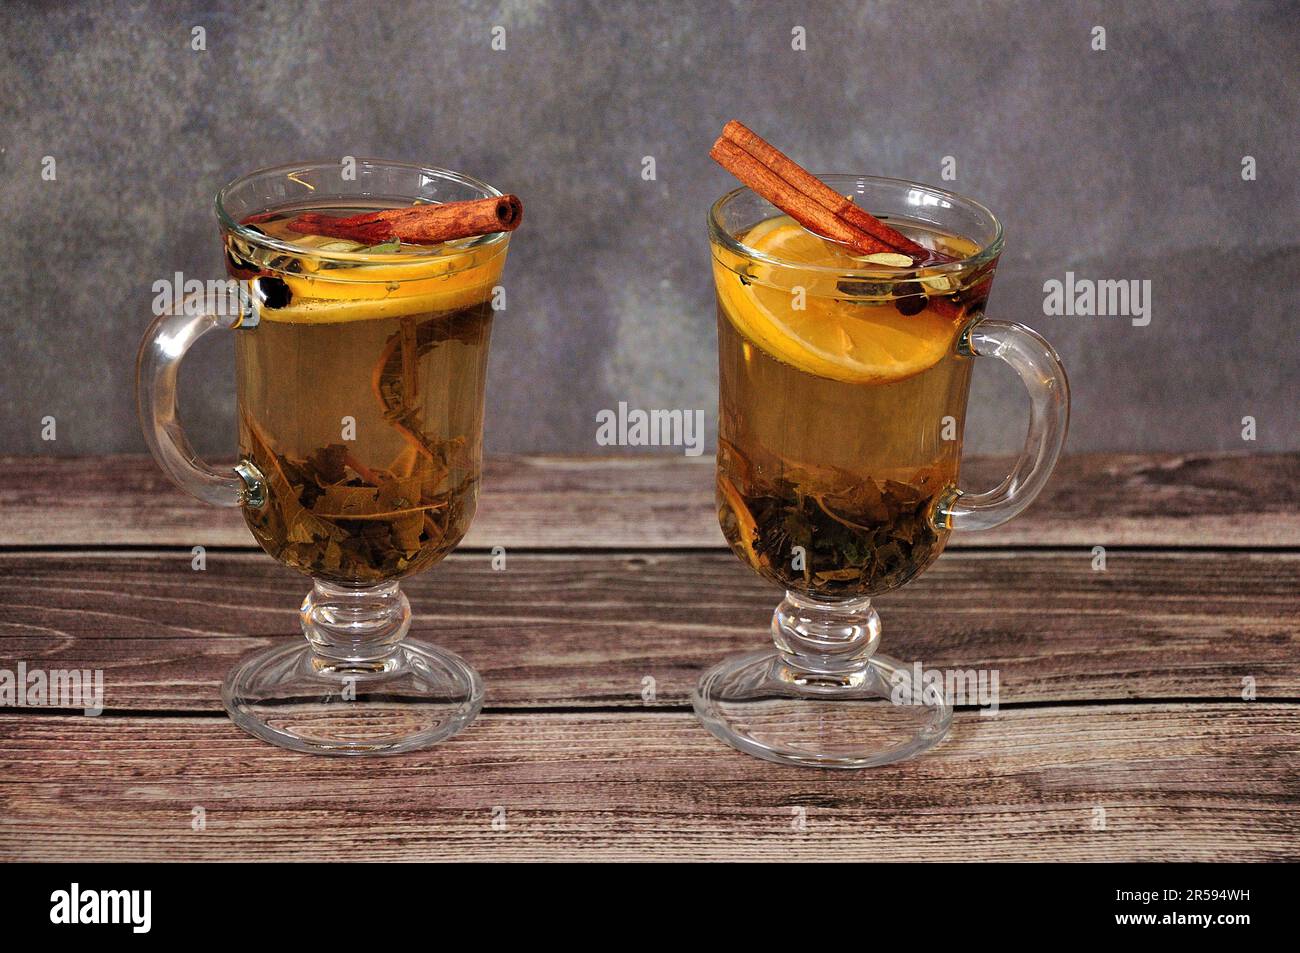 Two glasses of hot herbal tea with lemon slice, spices and cinnamon sticks on a wooden table. Close-up. Stock Photo